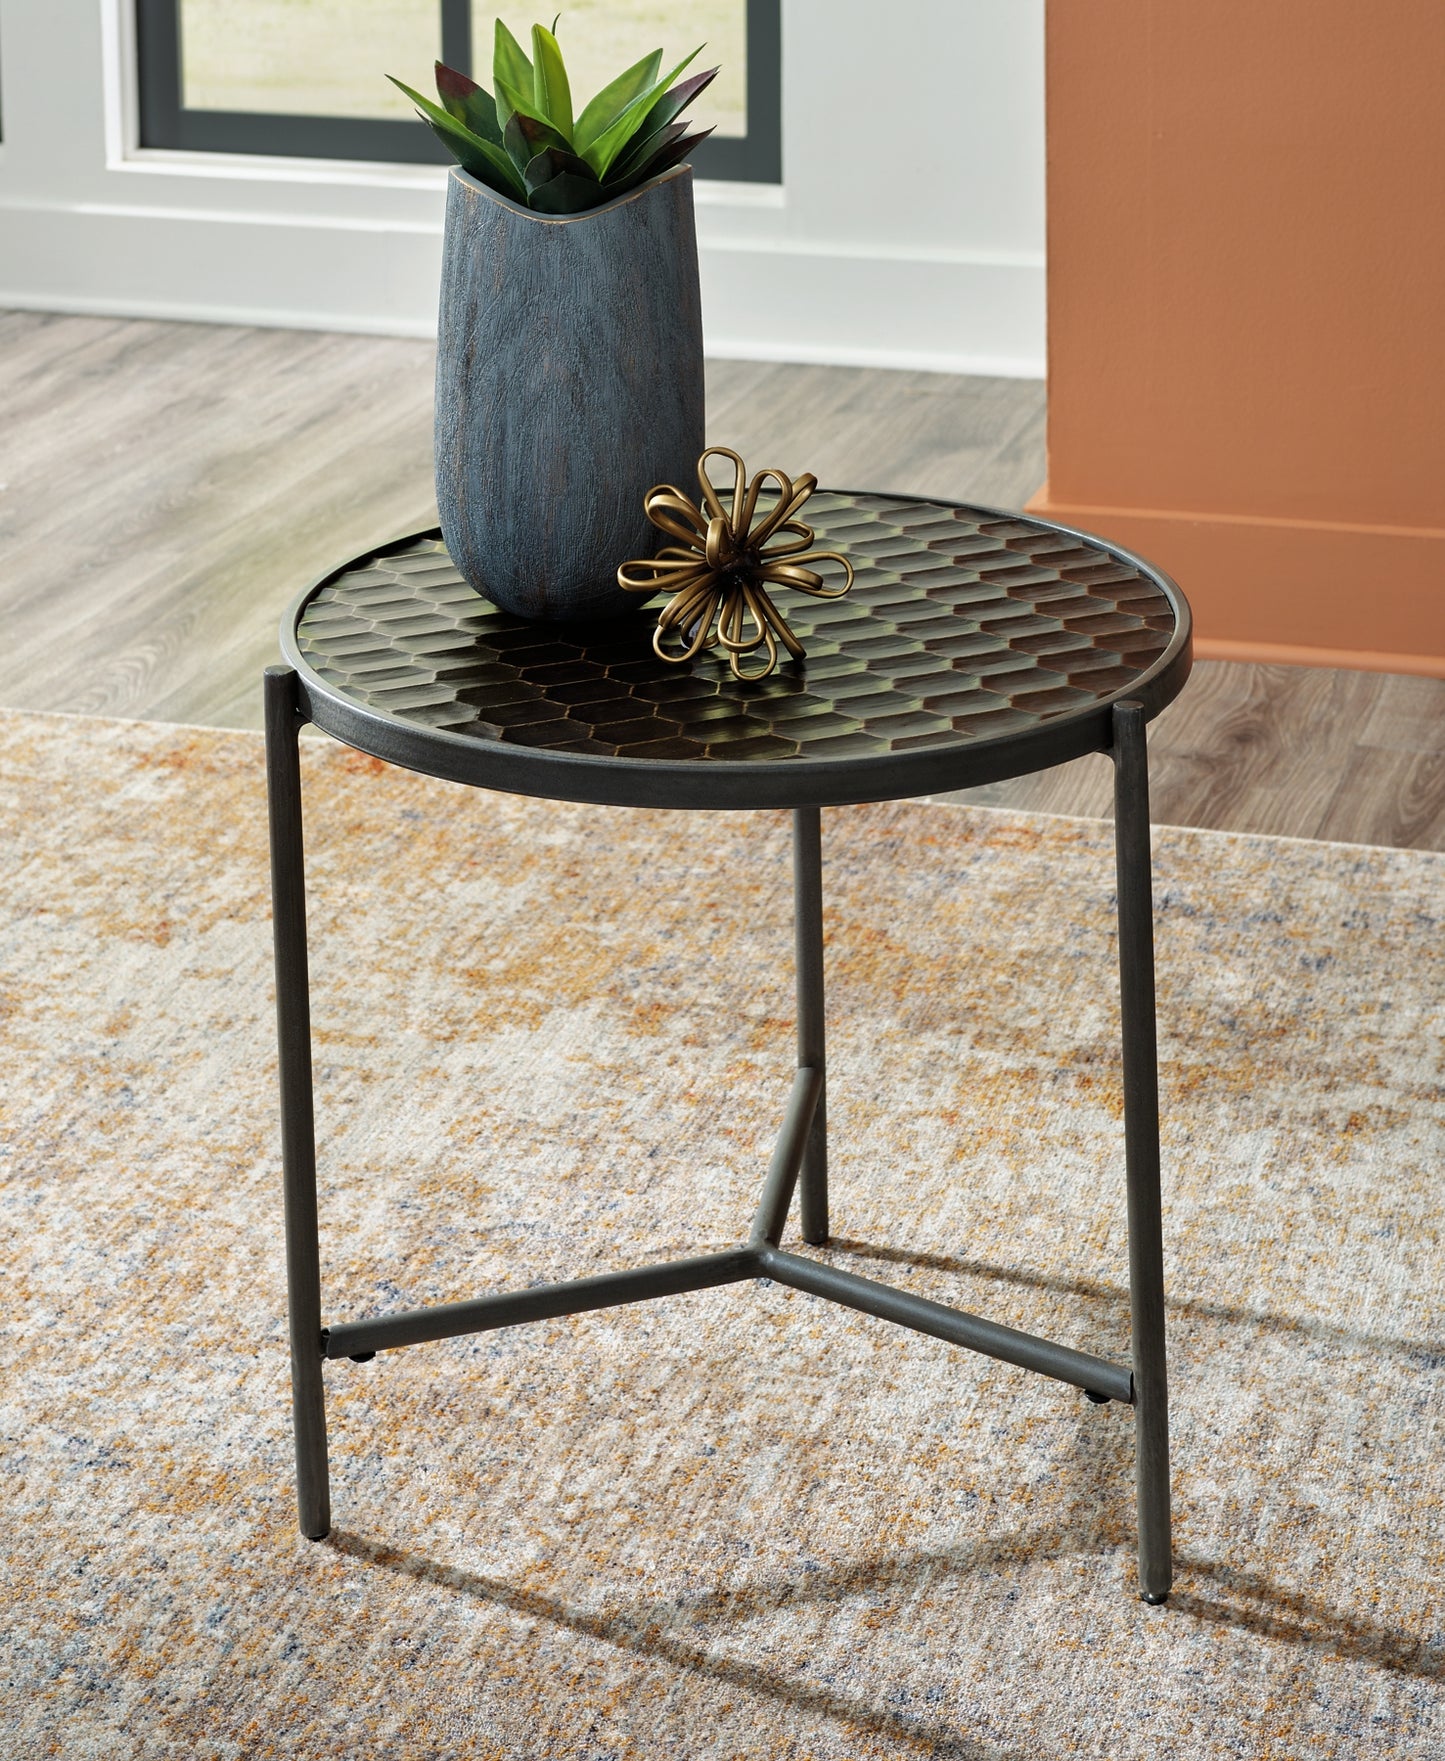 Doraley Chair Side End Table